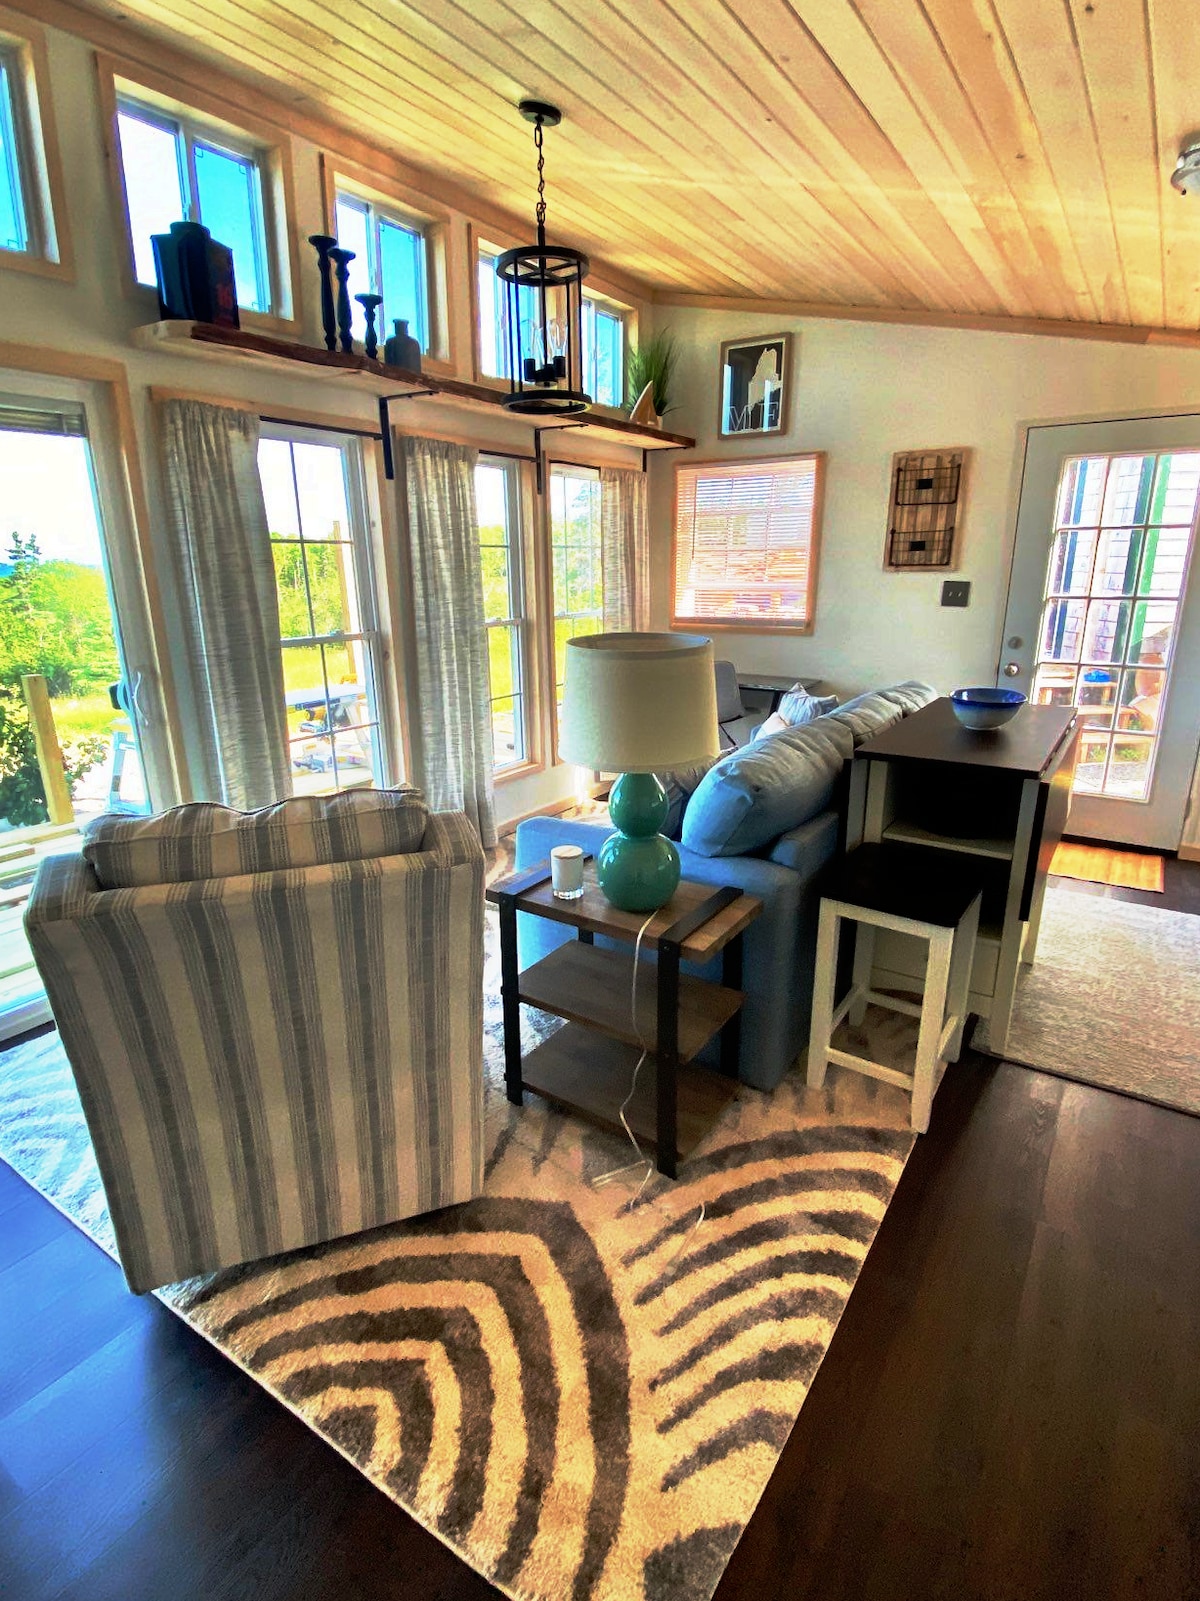 Charming 1 bedroom tiny house with full kitchen, laundry, deck, and picture perfect views.